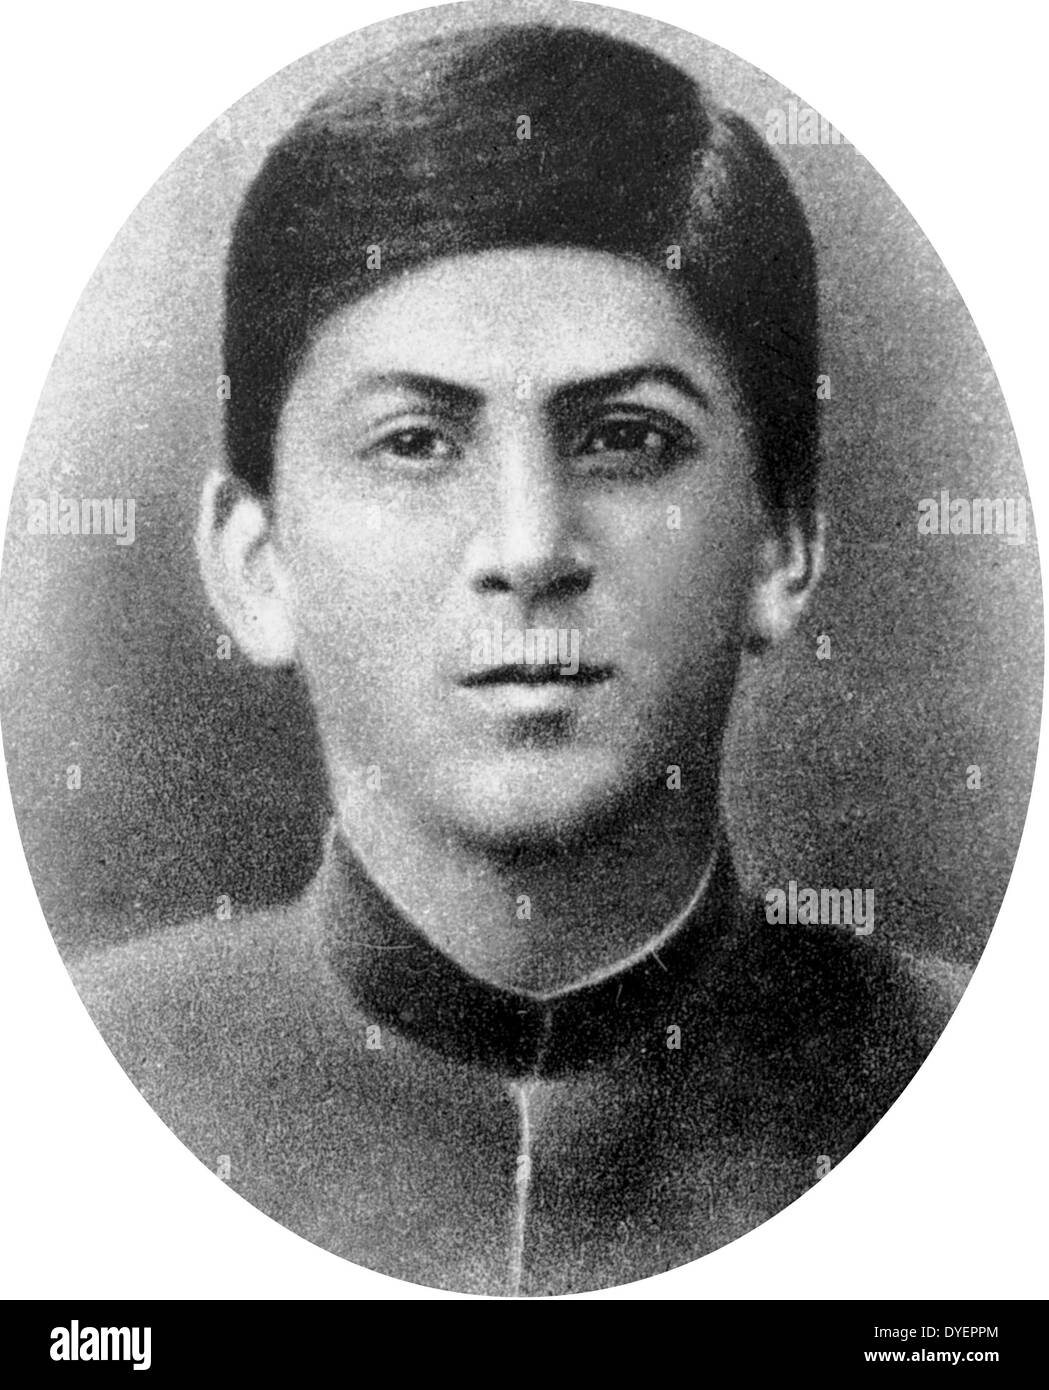 Joseph Stalin, leader of the Soviet Union from the mid-1920s until his death in 1953. Born 1878, in Georgia, died March 5, 1953. Stock Photo